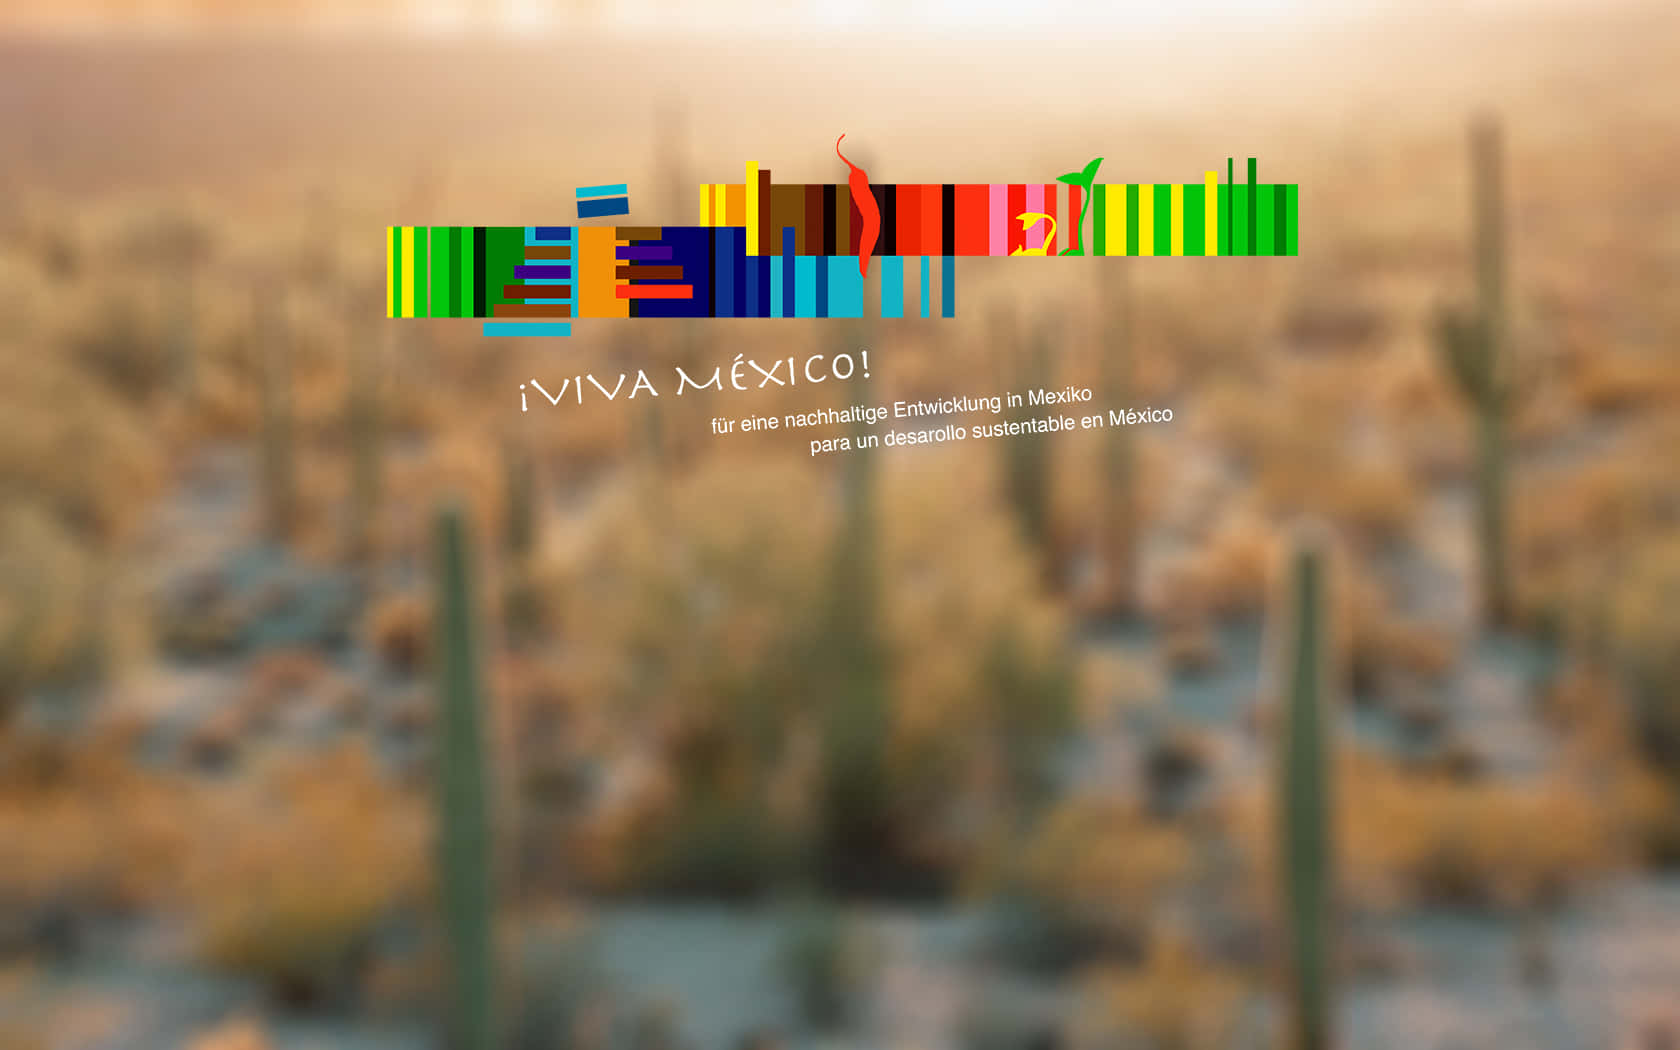 A Colorful Background With Cactus And A Sign Background